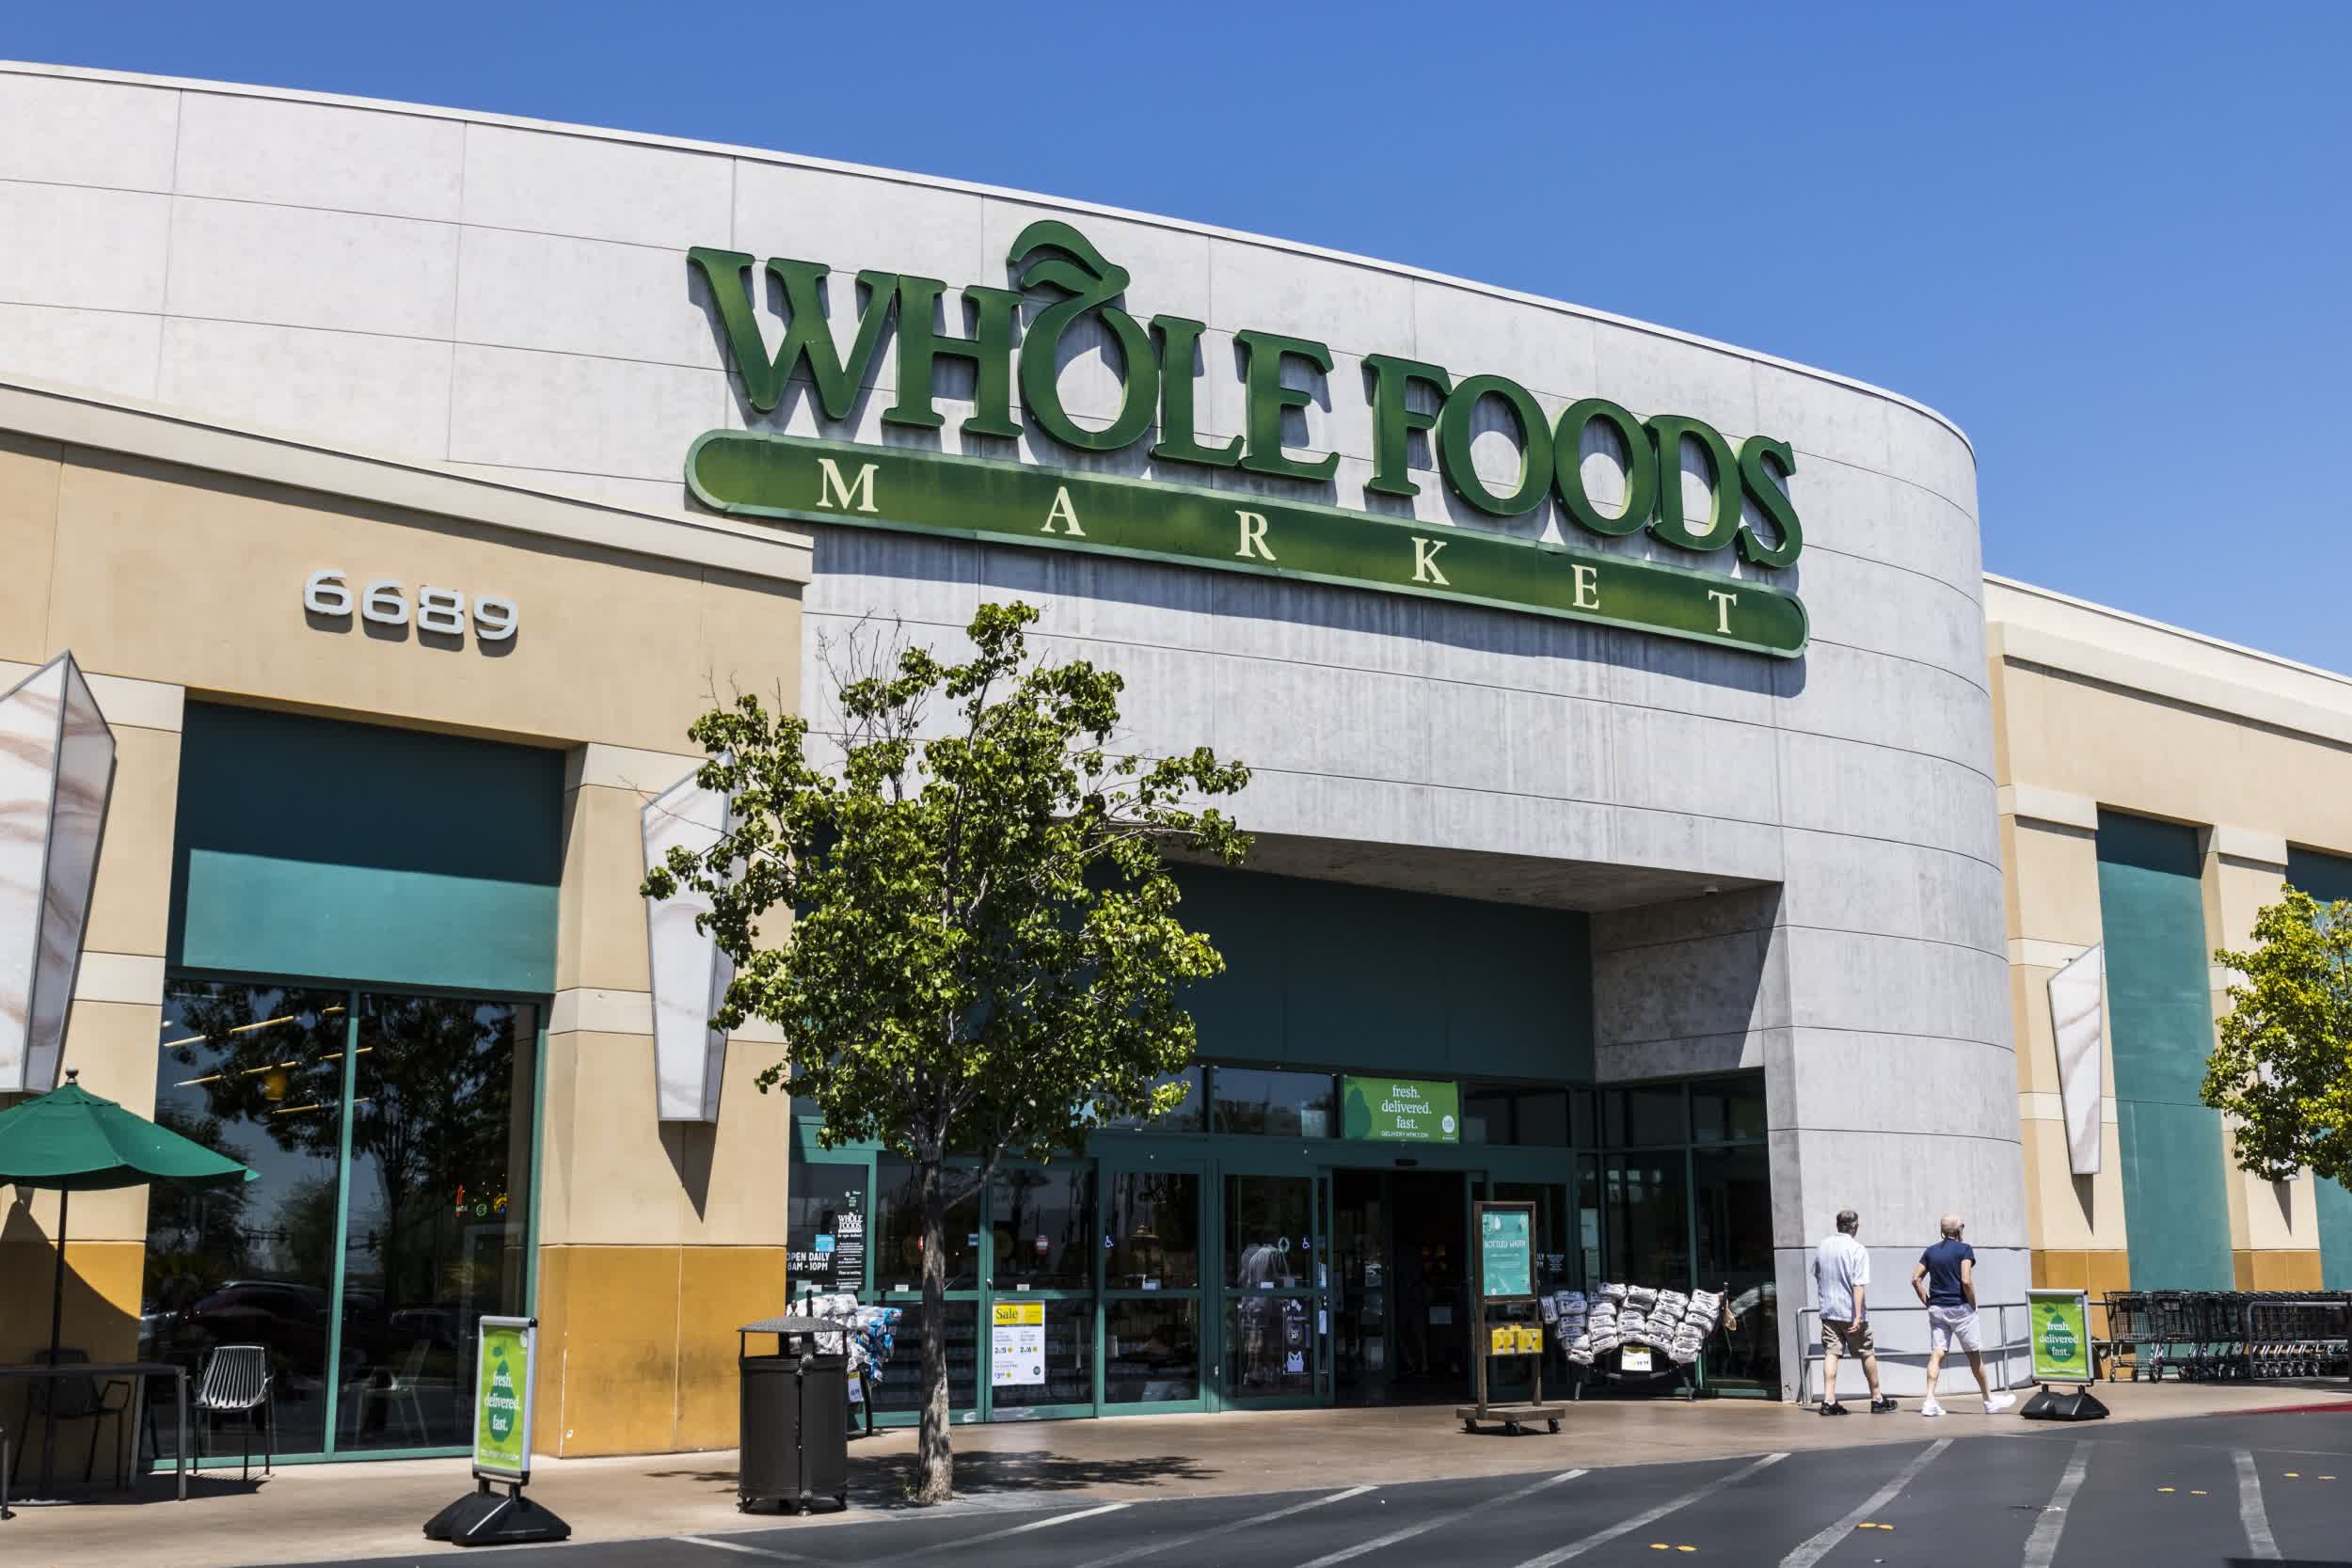 Amazon now offers free, one-hour grocery pickup for Prime members at all Whole Foods in the US